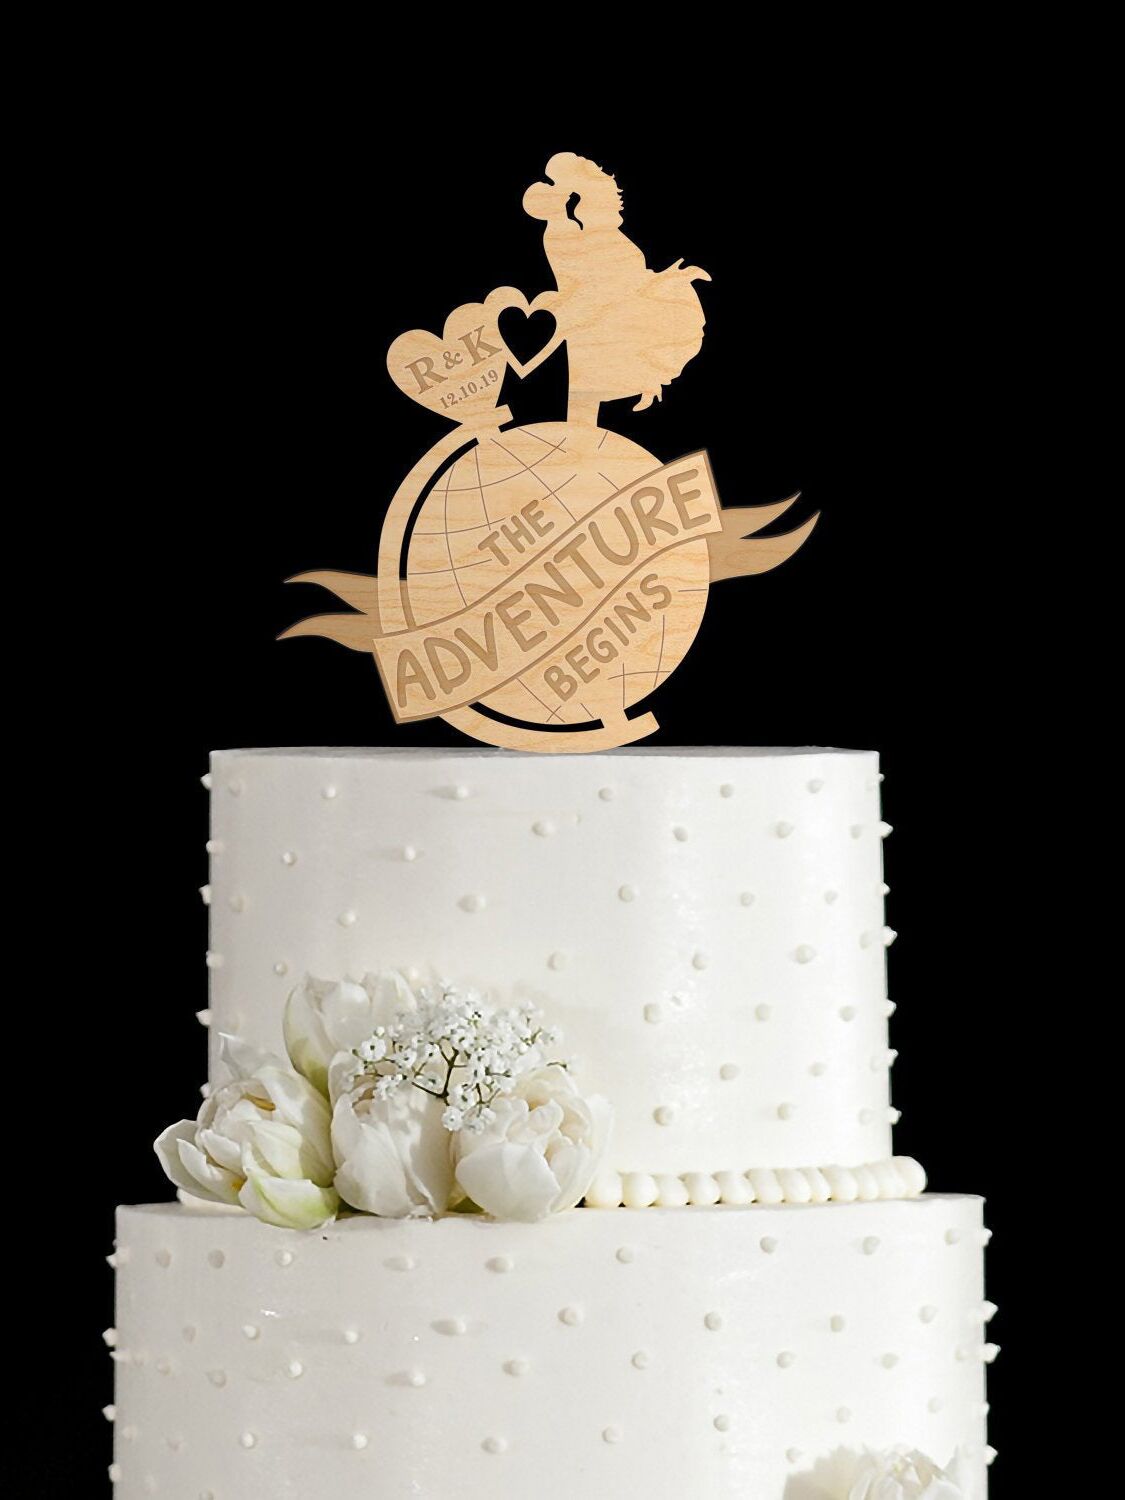 Personalized wooden wedding cake topper